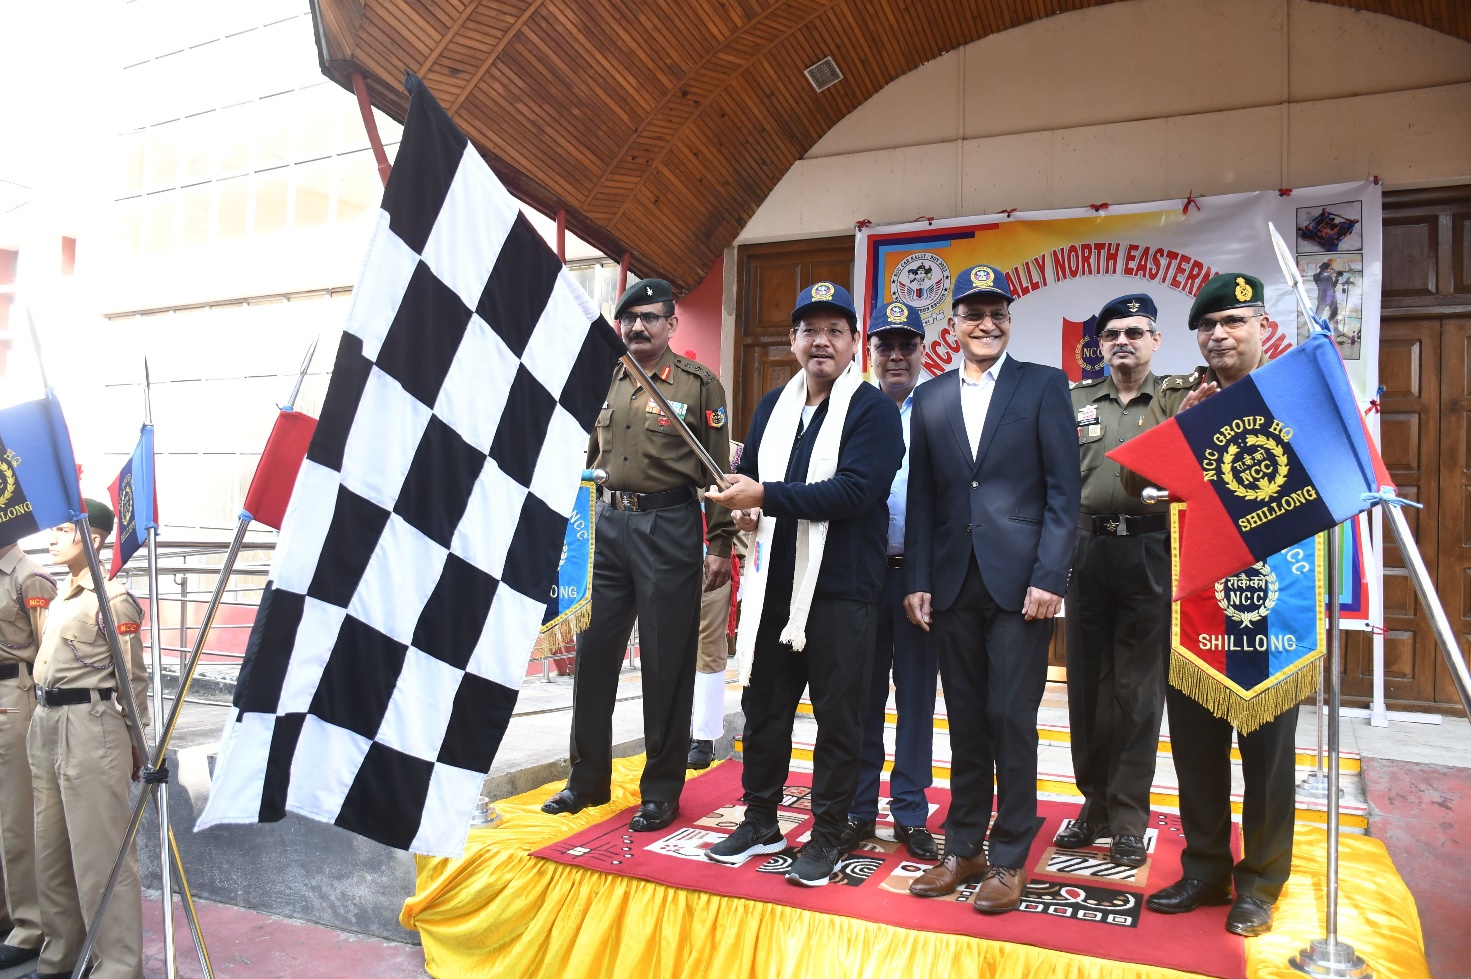 Maruti Suzuki and National Cadet Corps join forces for a Historic Northeastern Expedition